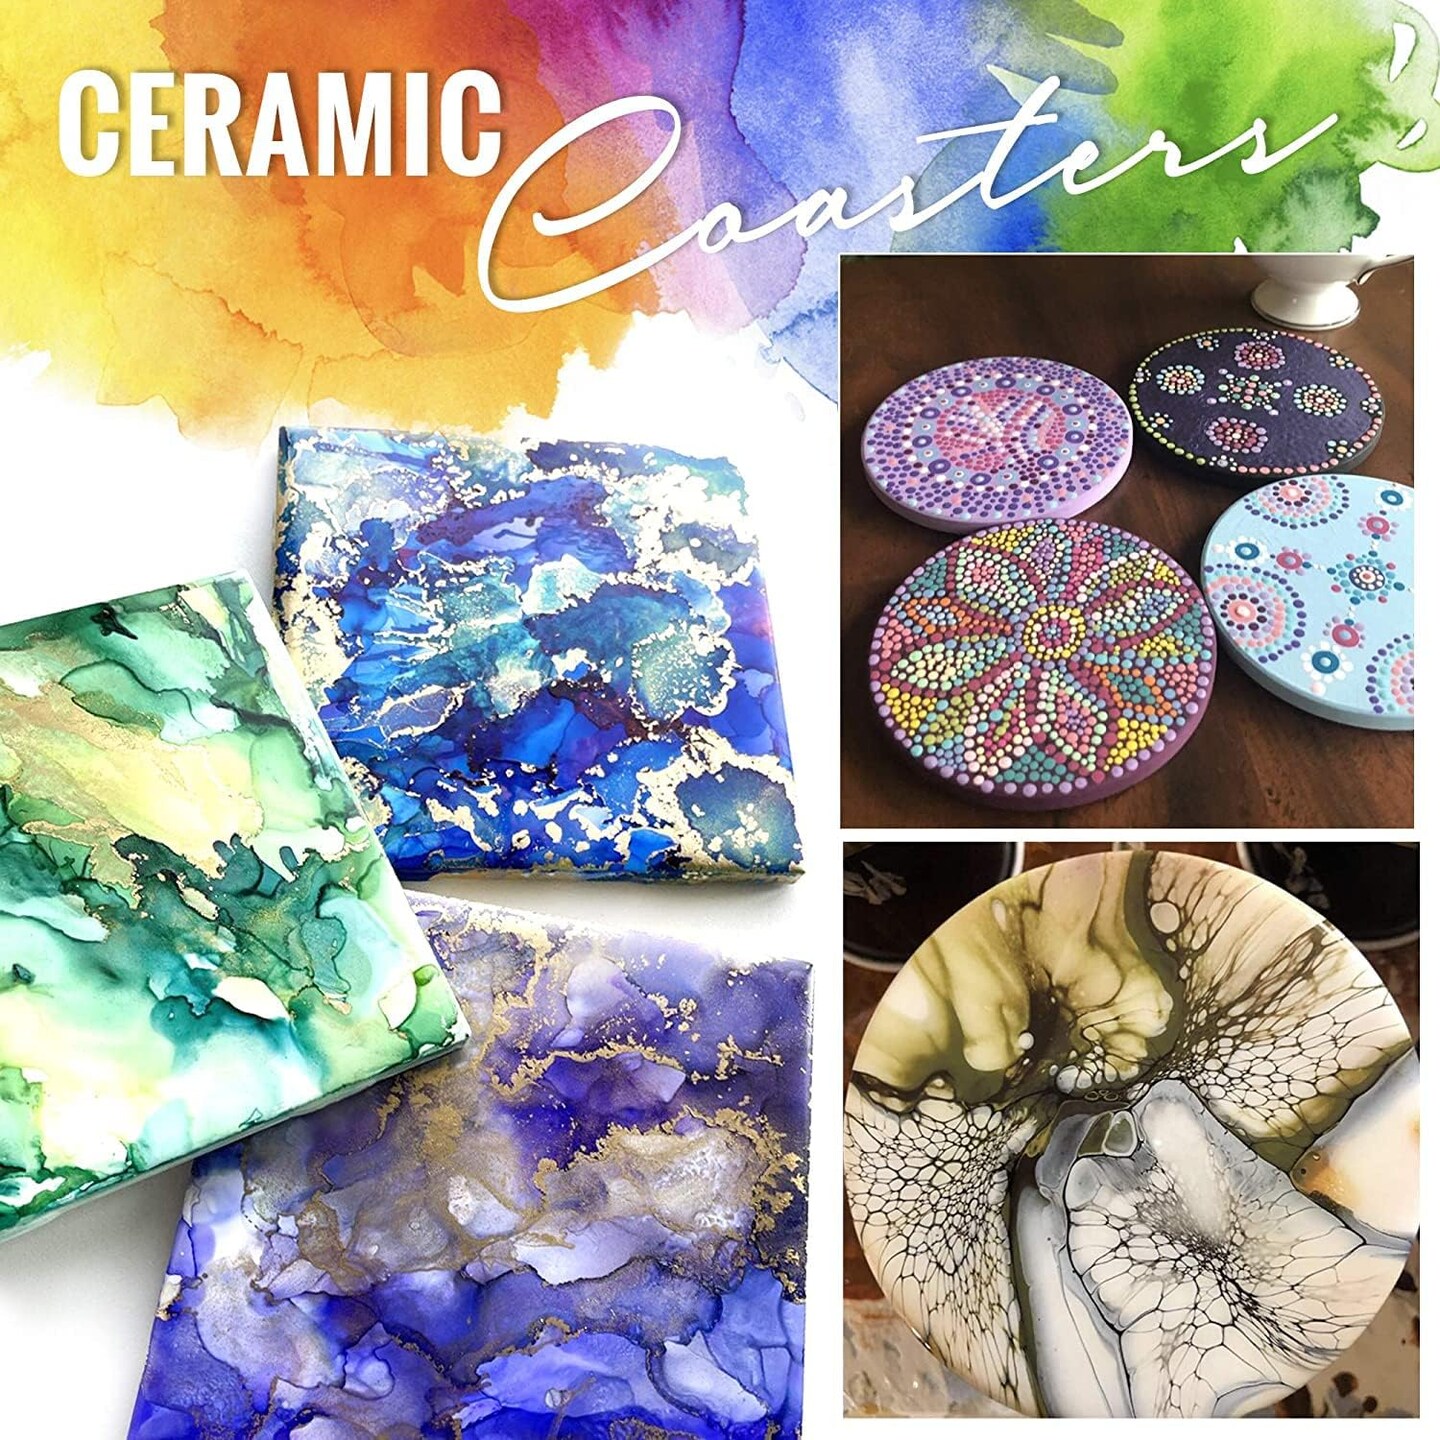 50 Blank Ceramic Tiles for Coasters and Mosaics - 4x4 Ceramic White Tiles (Unglazed) with Cork Backing Pads for Use With Alcohol Ink or Acrylic Pouring